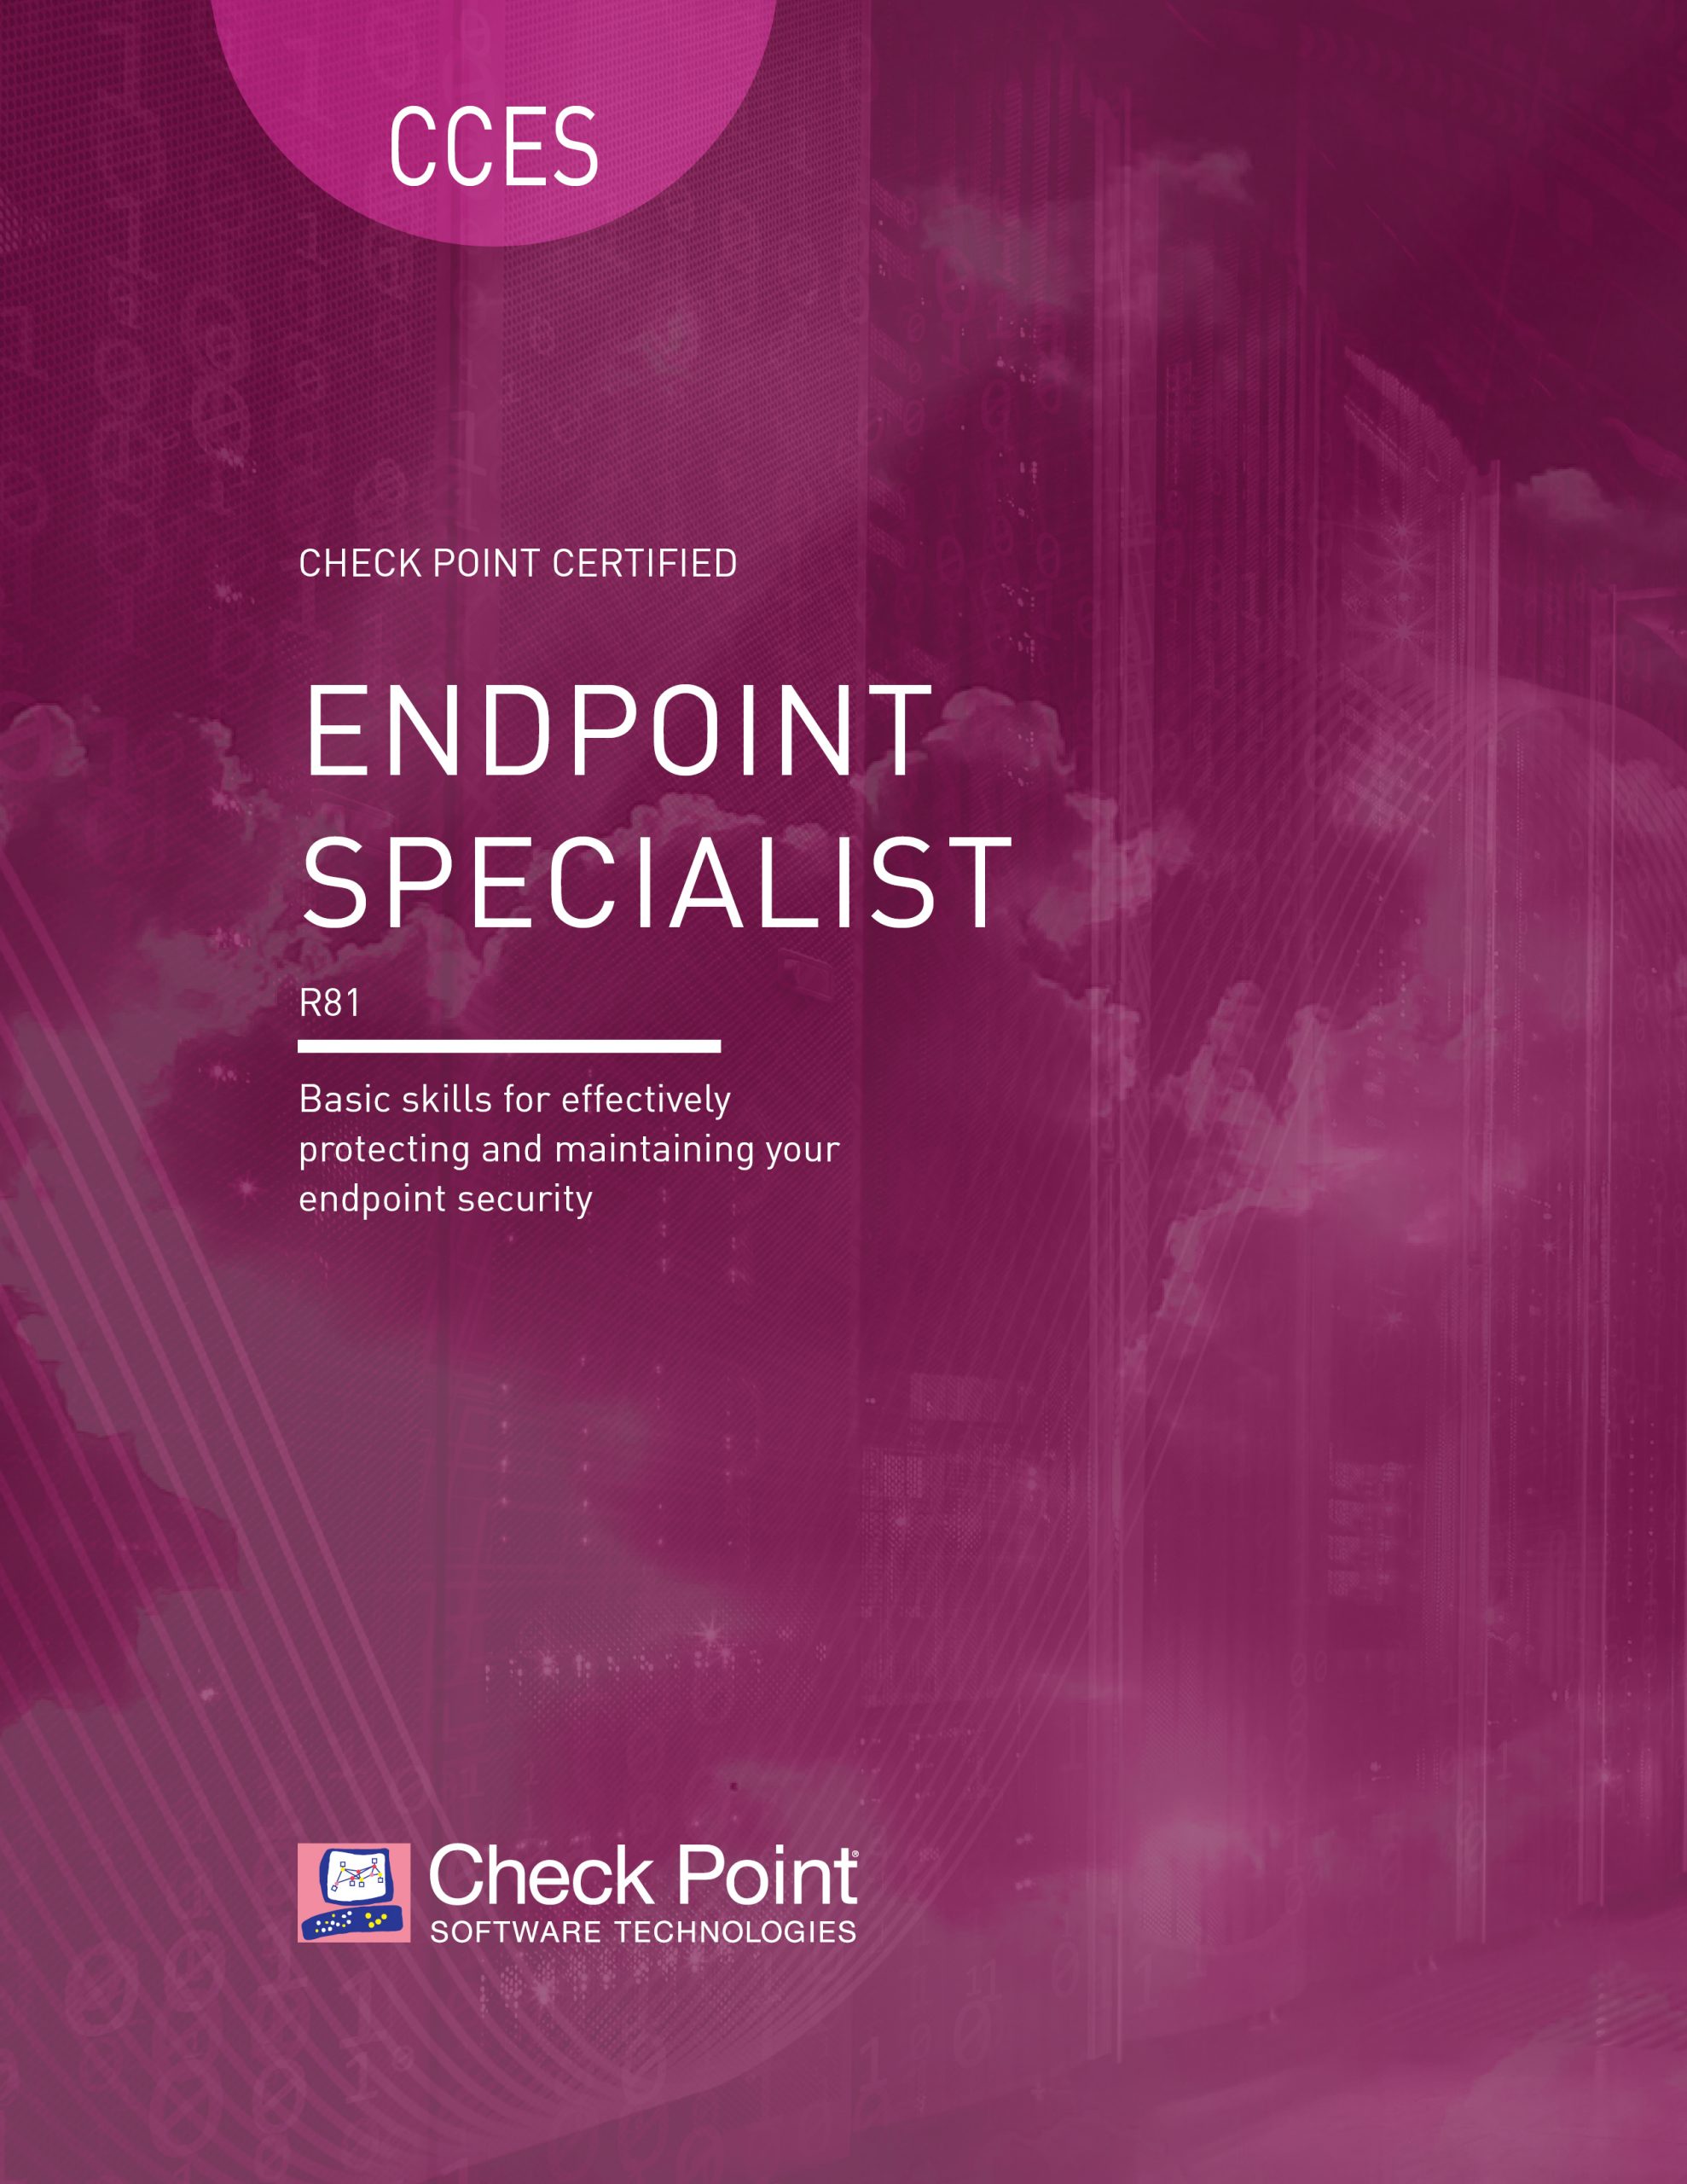 CCES – Check Point Certified Endpoint Specialist (Updated 2021 – R81)